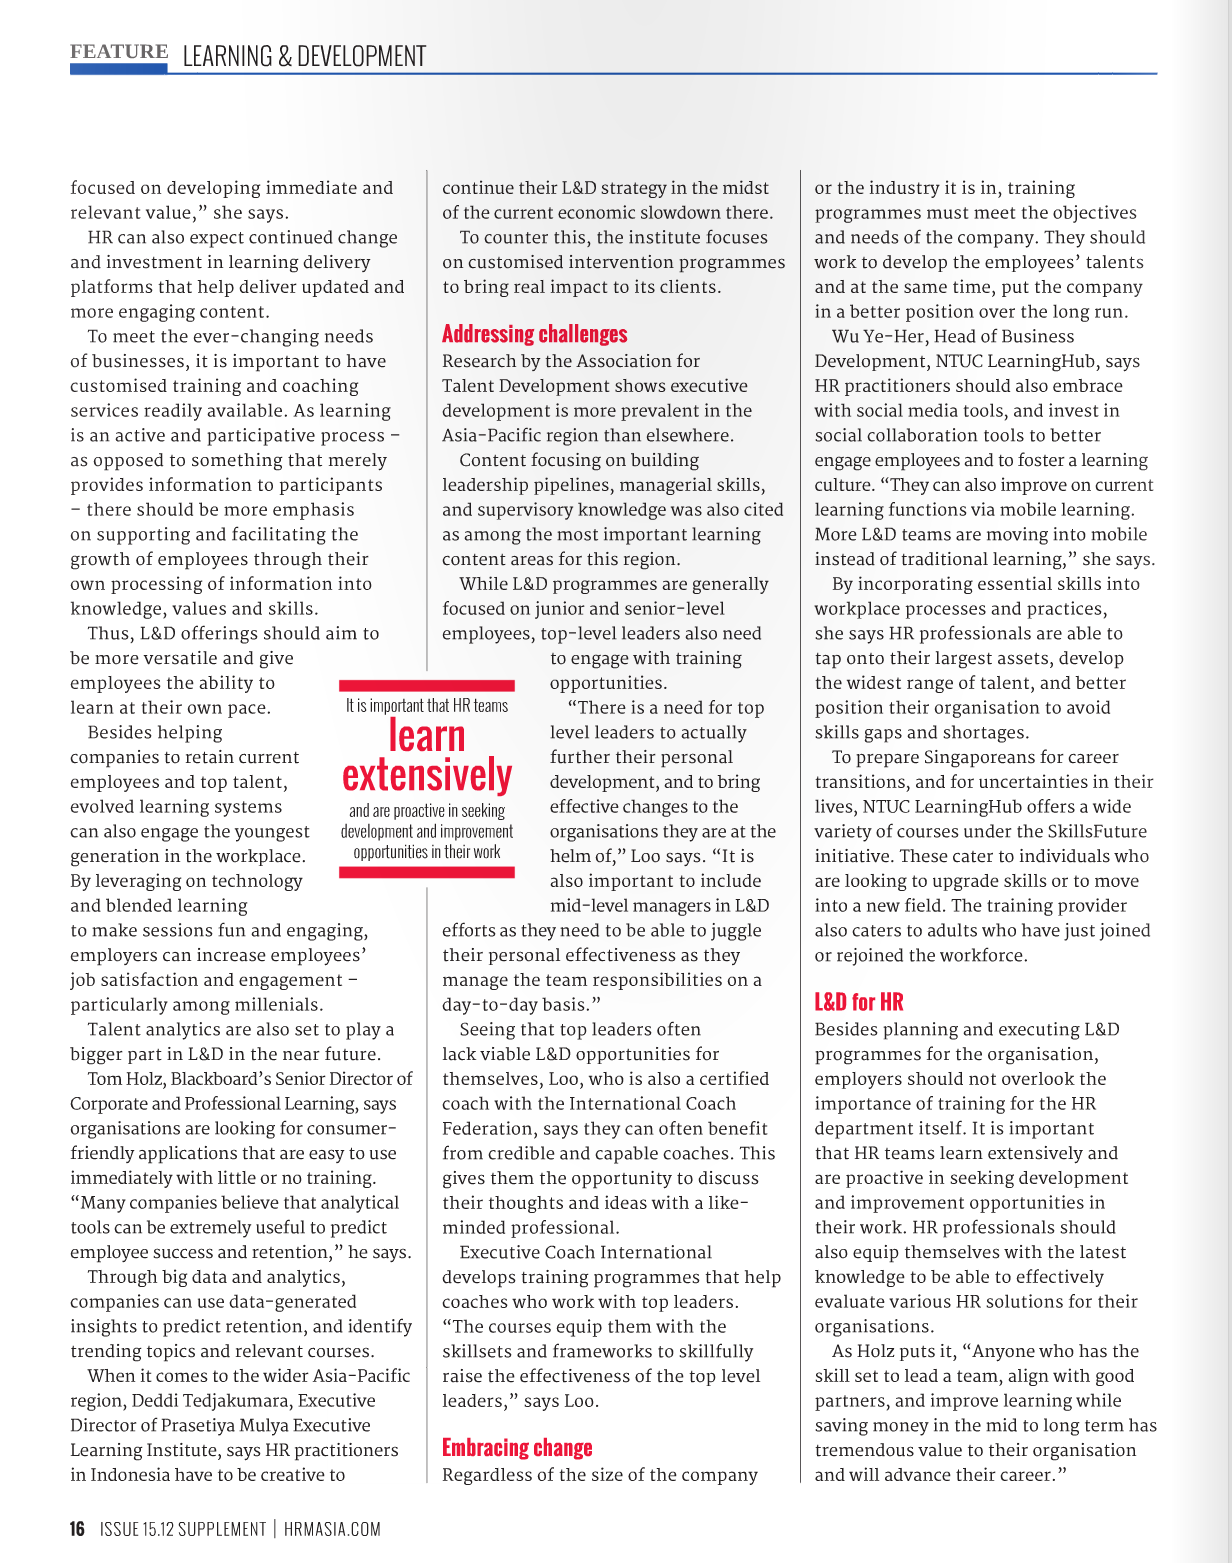 HRM Asia_Supplement 16.1 (2 of 2)